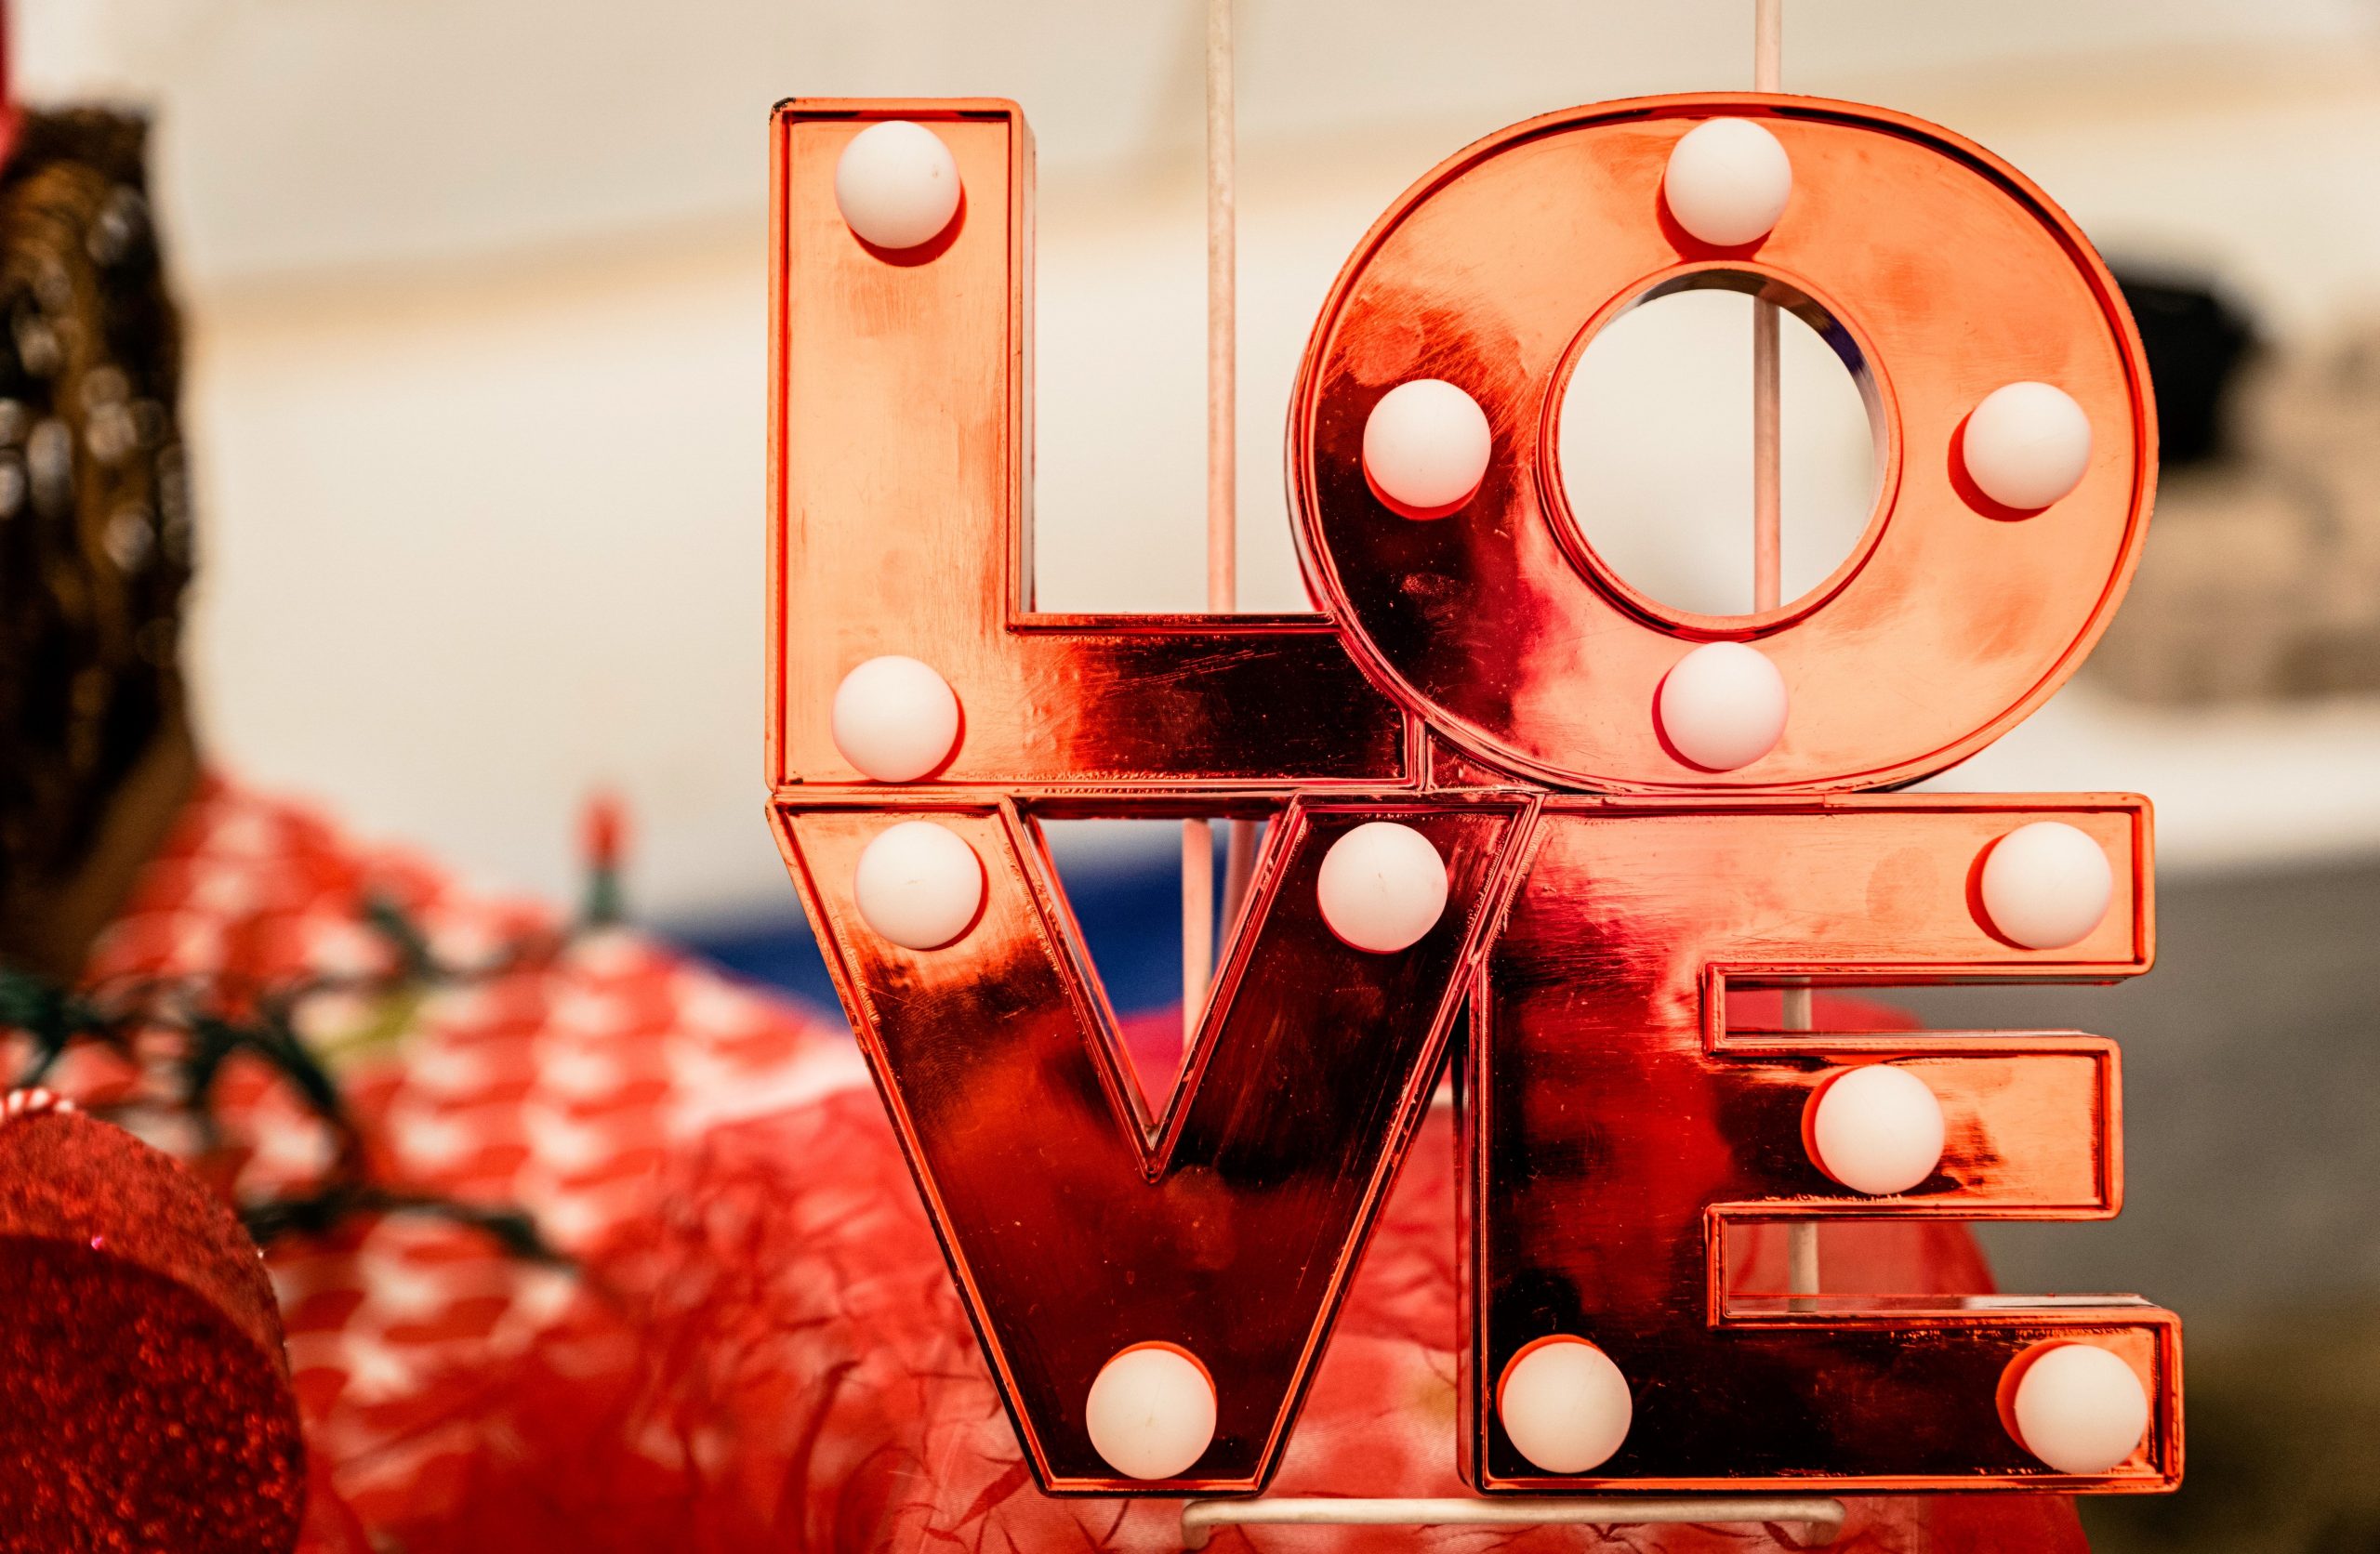 Confused how to spend Valentine’s Day? Here are some tips to plan the special day